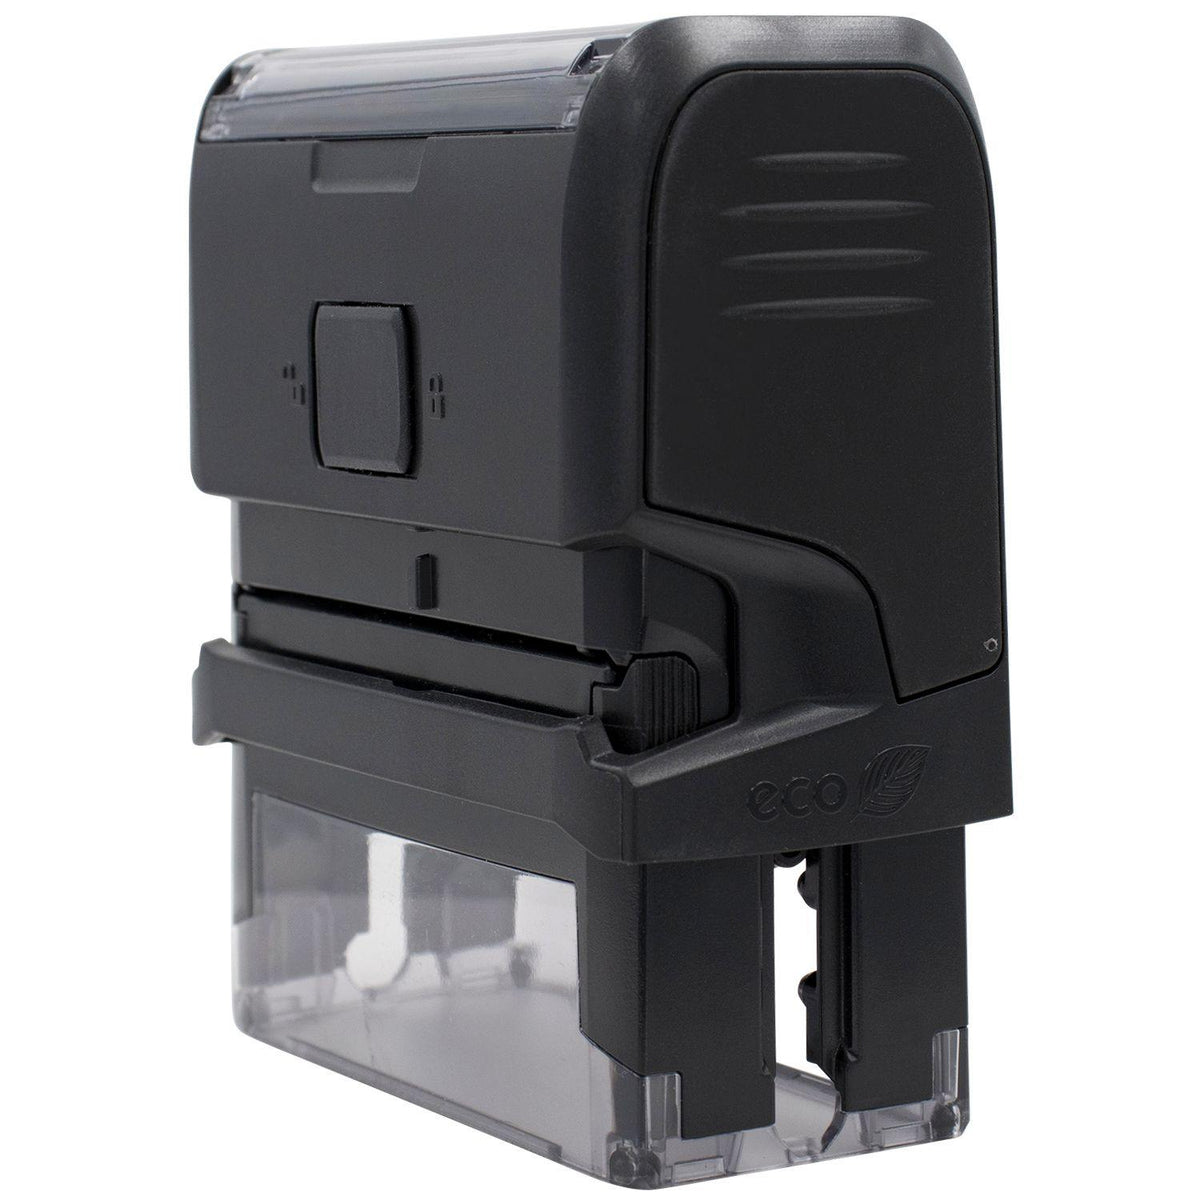 Side View of Large Self Inking 100 Stamp at an Angle